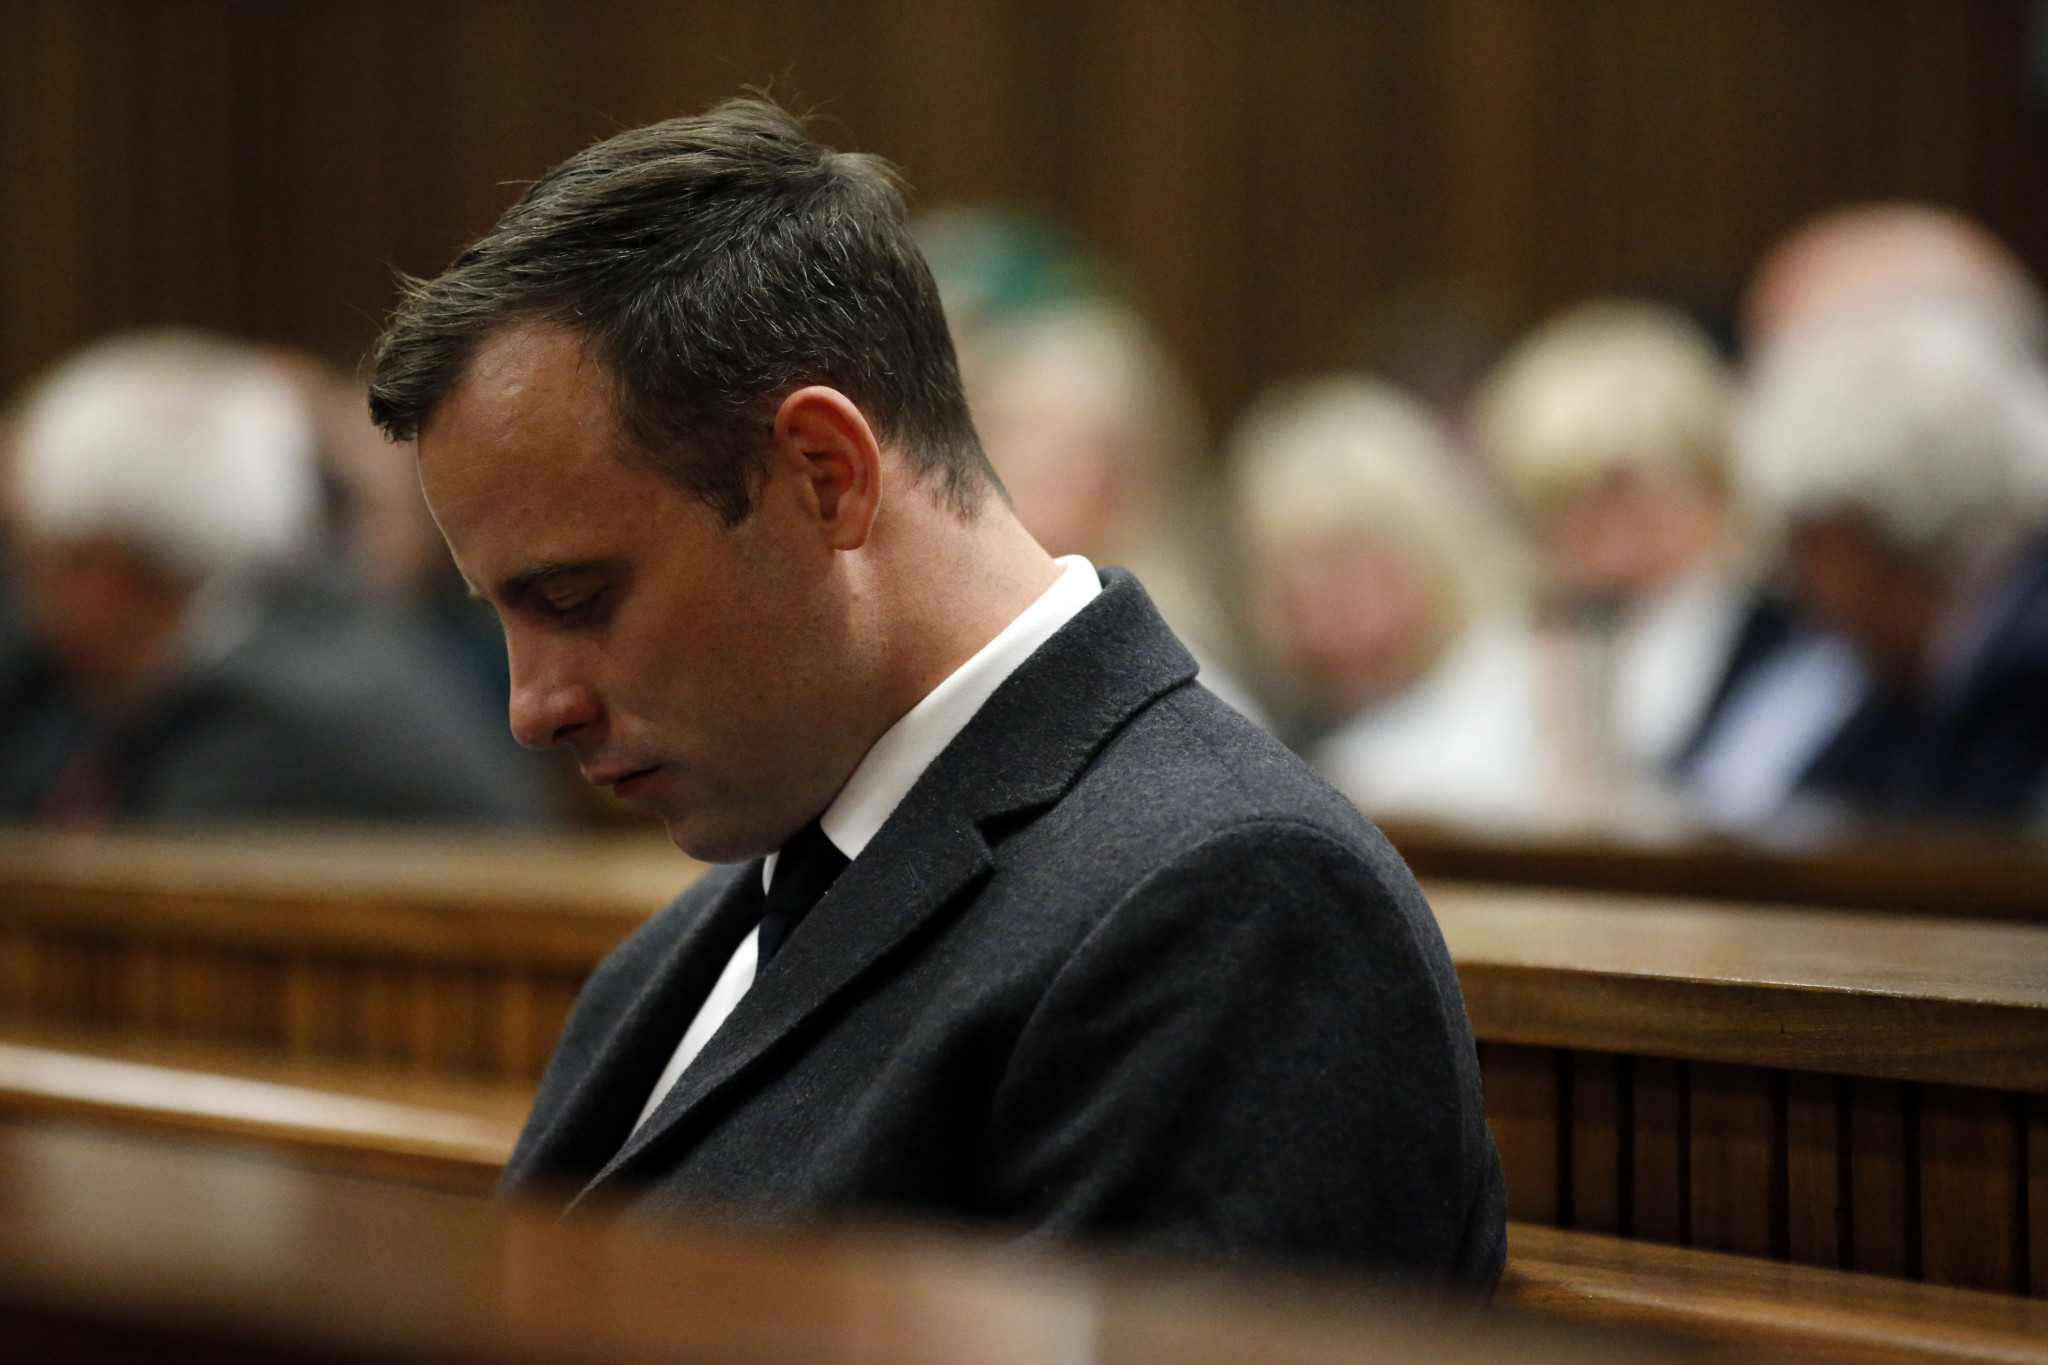 Oscar Pistorius is serving a prison sentence of more than 13 years in South Africa for murdering girlfriend Reeva Steenkamp ©Getty Images